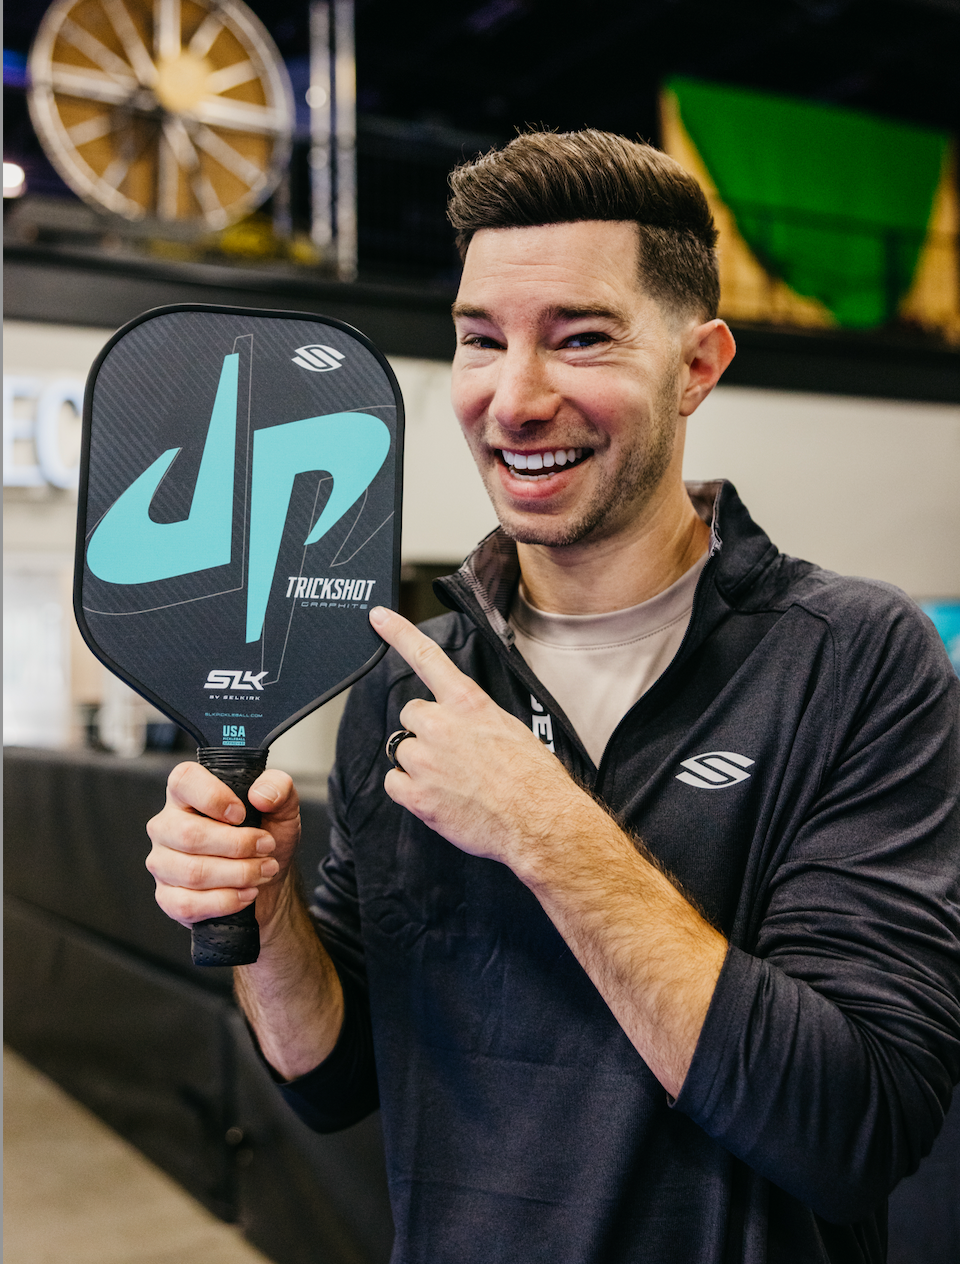 Dude Perfect hits the pickleball courts with the new SLK by Selkirk x Dude Perfect Trickshot Bundle